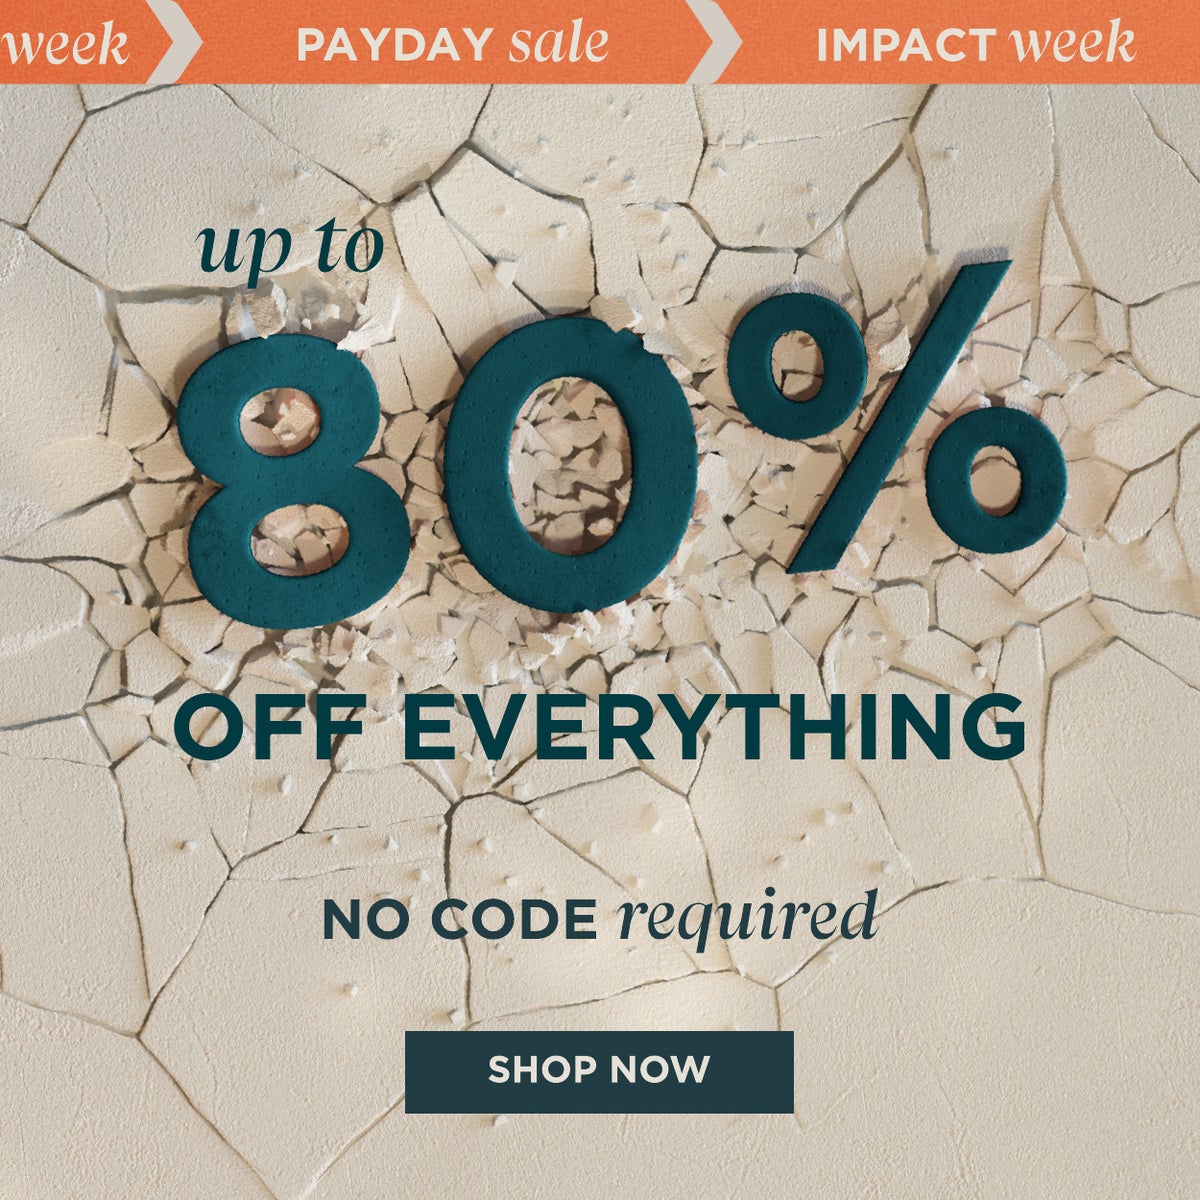 Impact Week Sale. Up to 80% off. No code required. shop now.